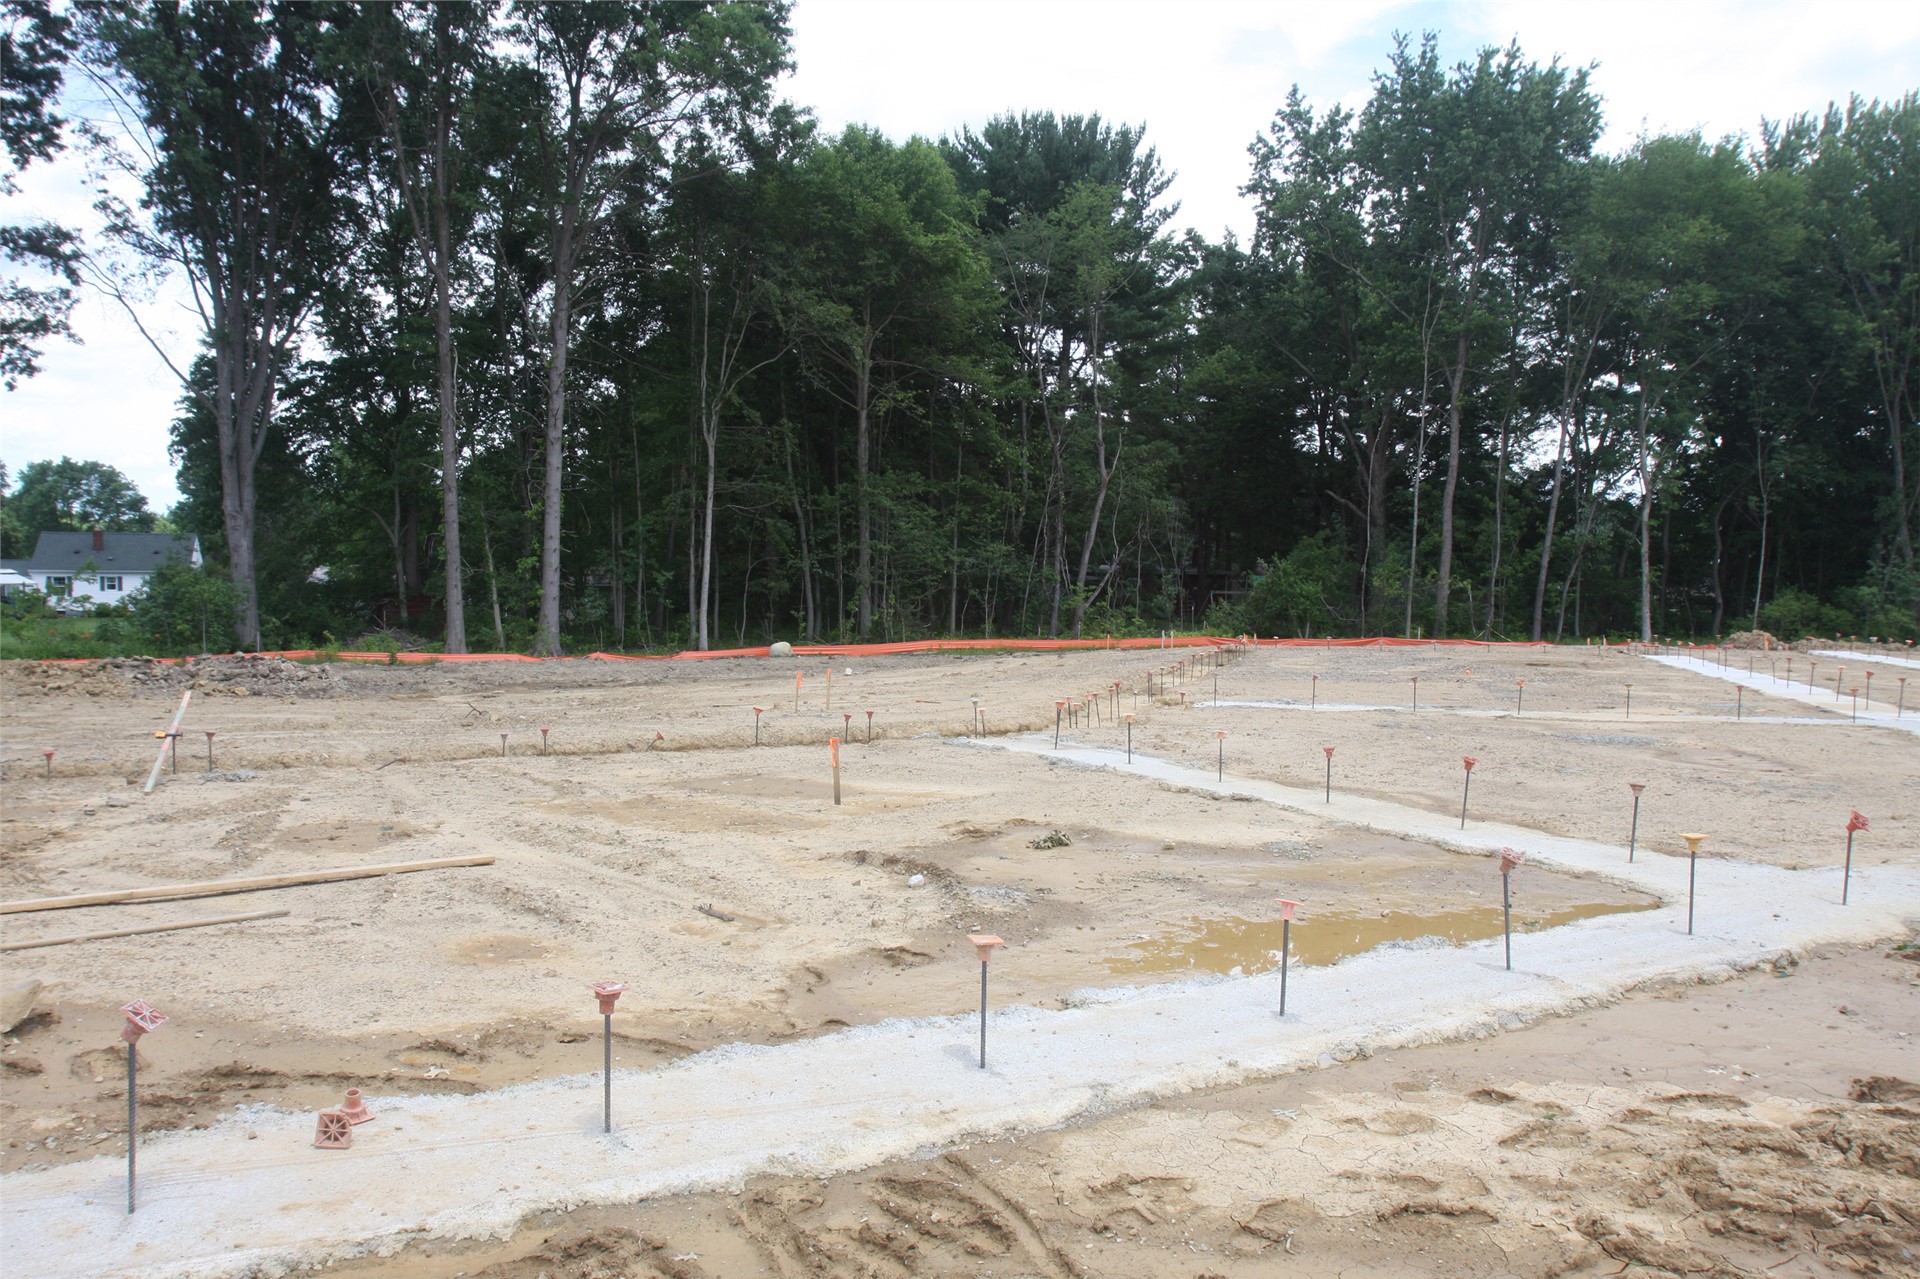 Footers outline classroom space in the academic wing